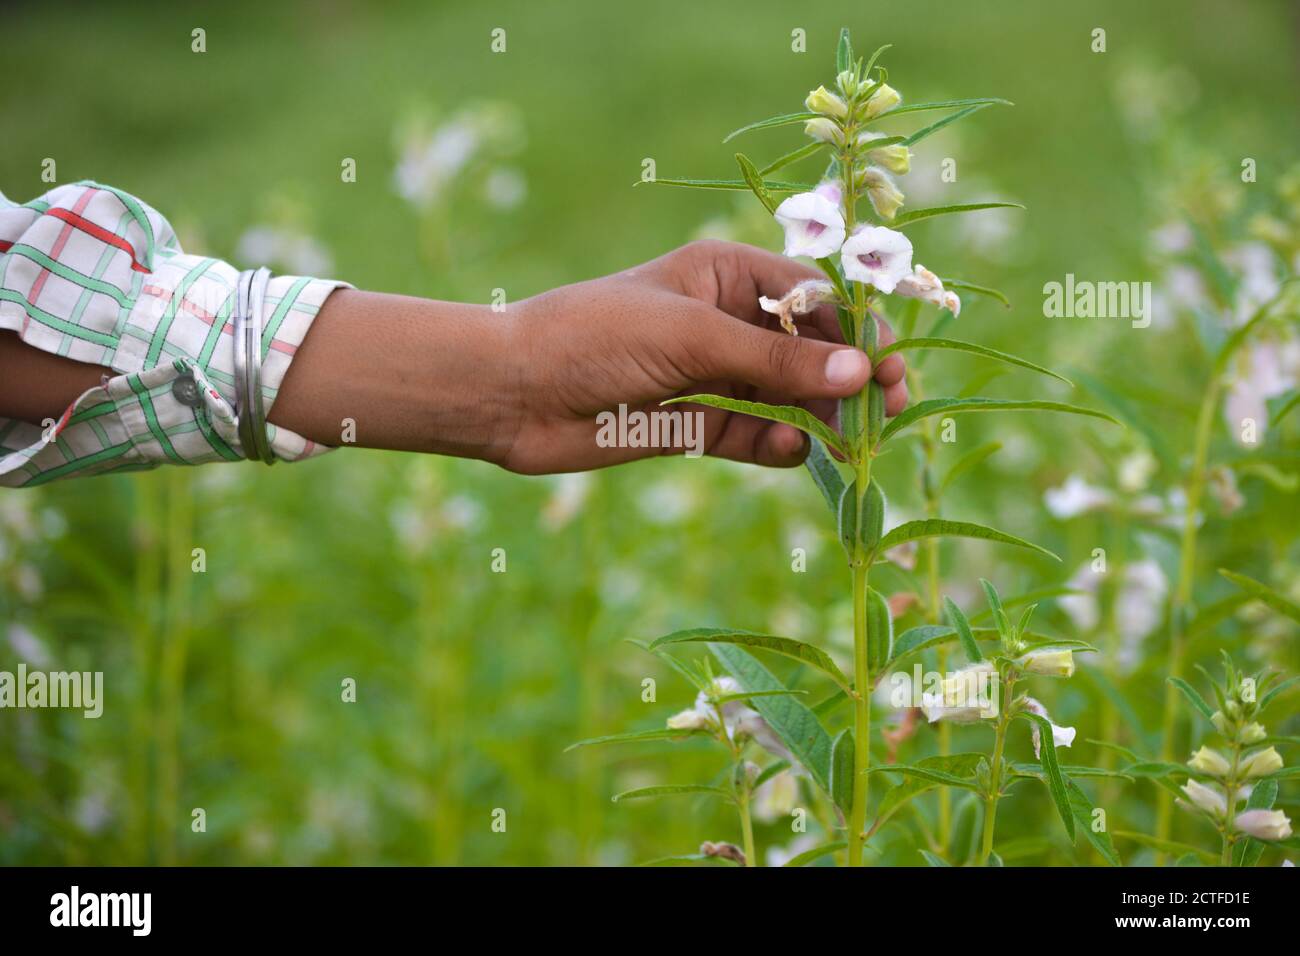 Male hand holding sesame plant against the background of a sesame field Stock Photo